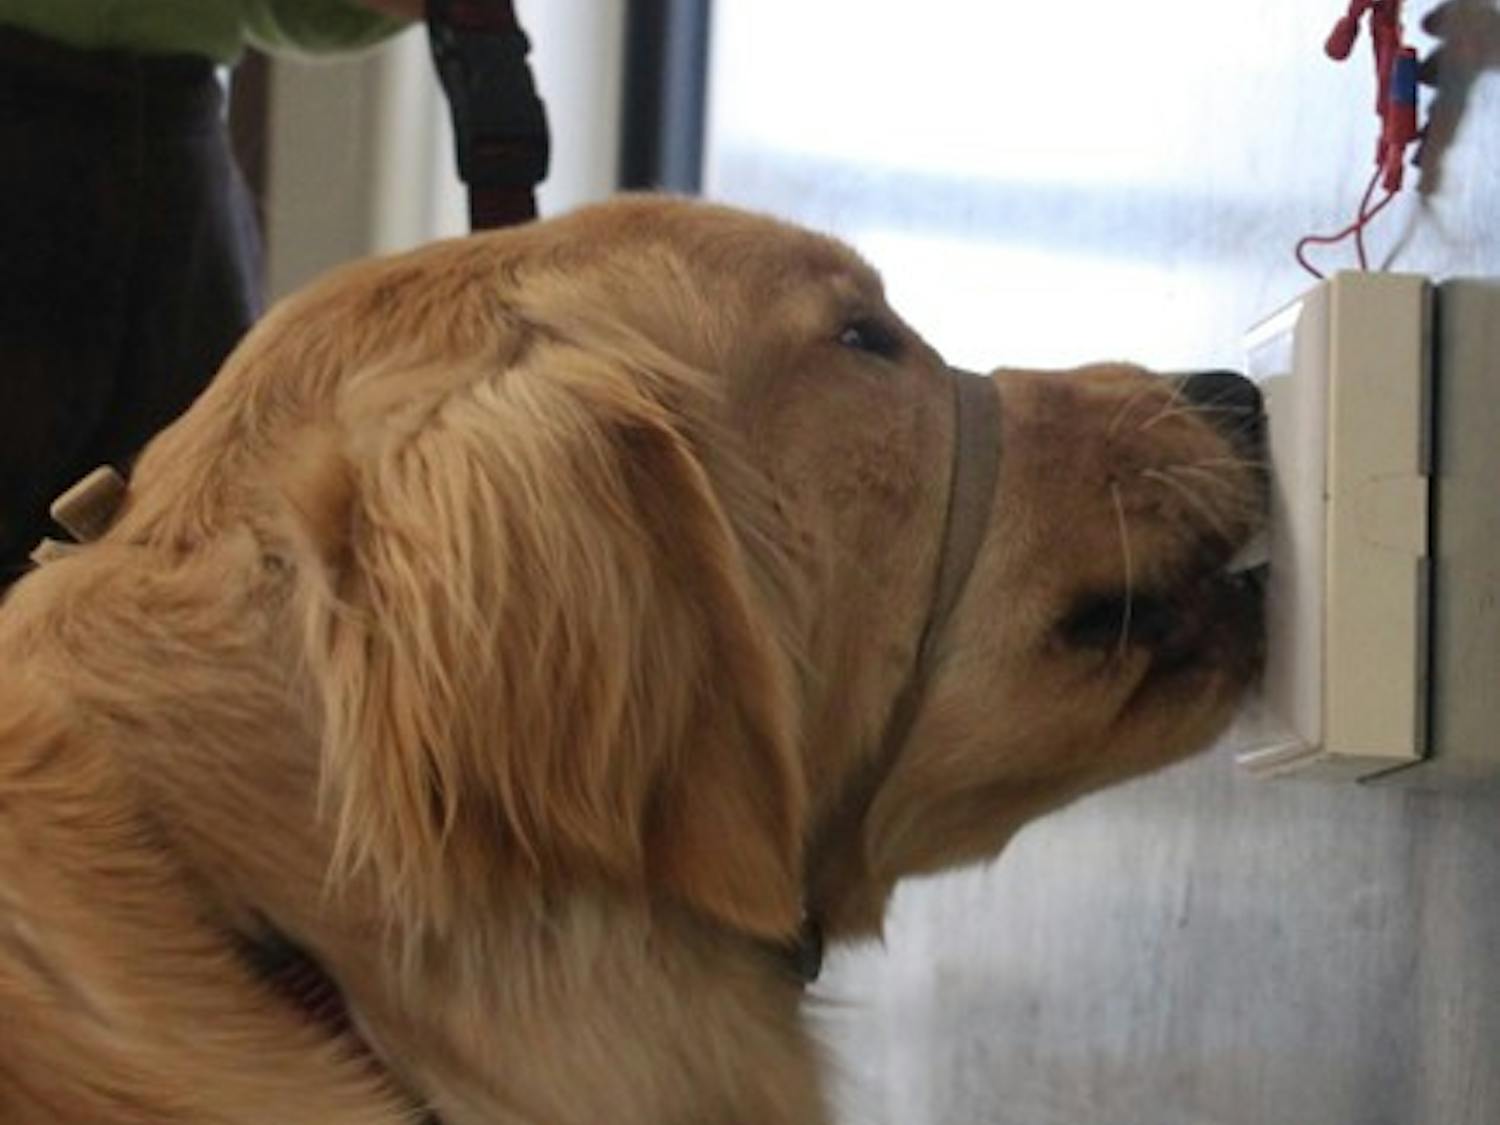 Mac, an 11-month-old Golden Retriever showcases his assistance dog skills by pressing buttons and switching light switches with his nose and his paws. Debra Cunningham is his trainer and Eyes ears Nose and Paws program director